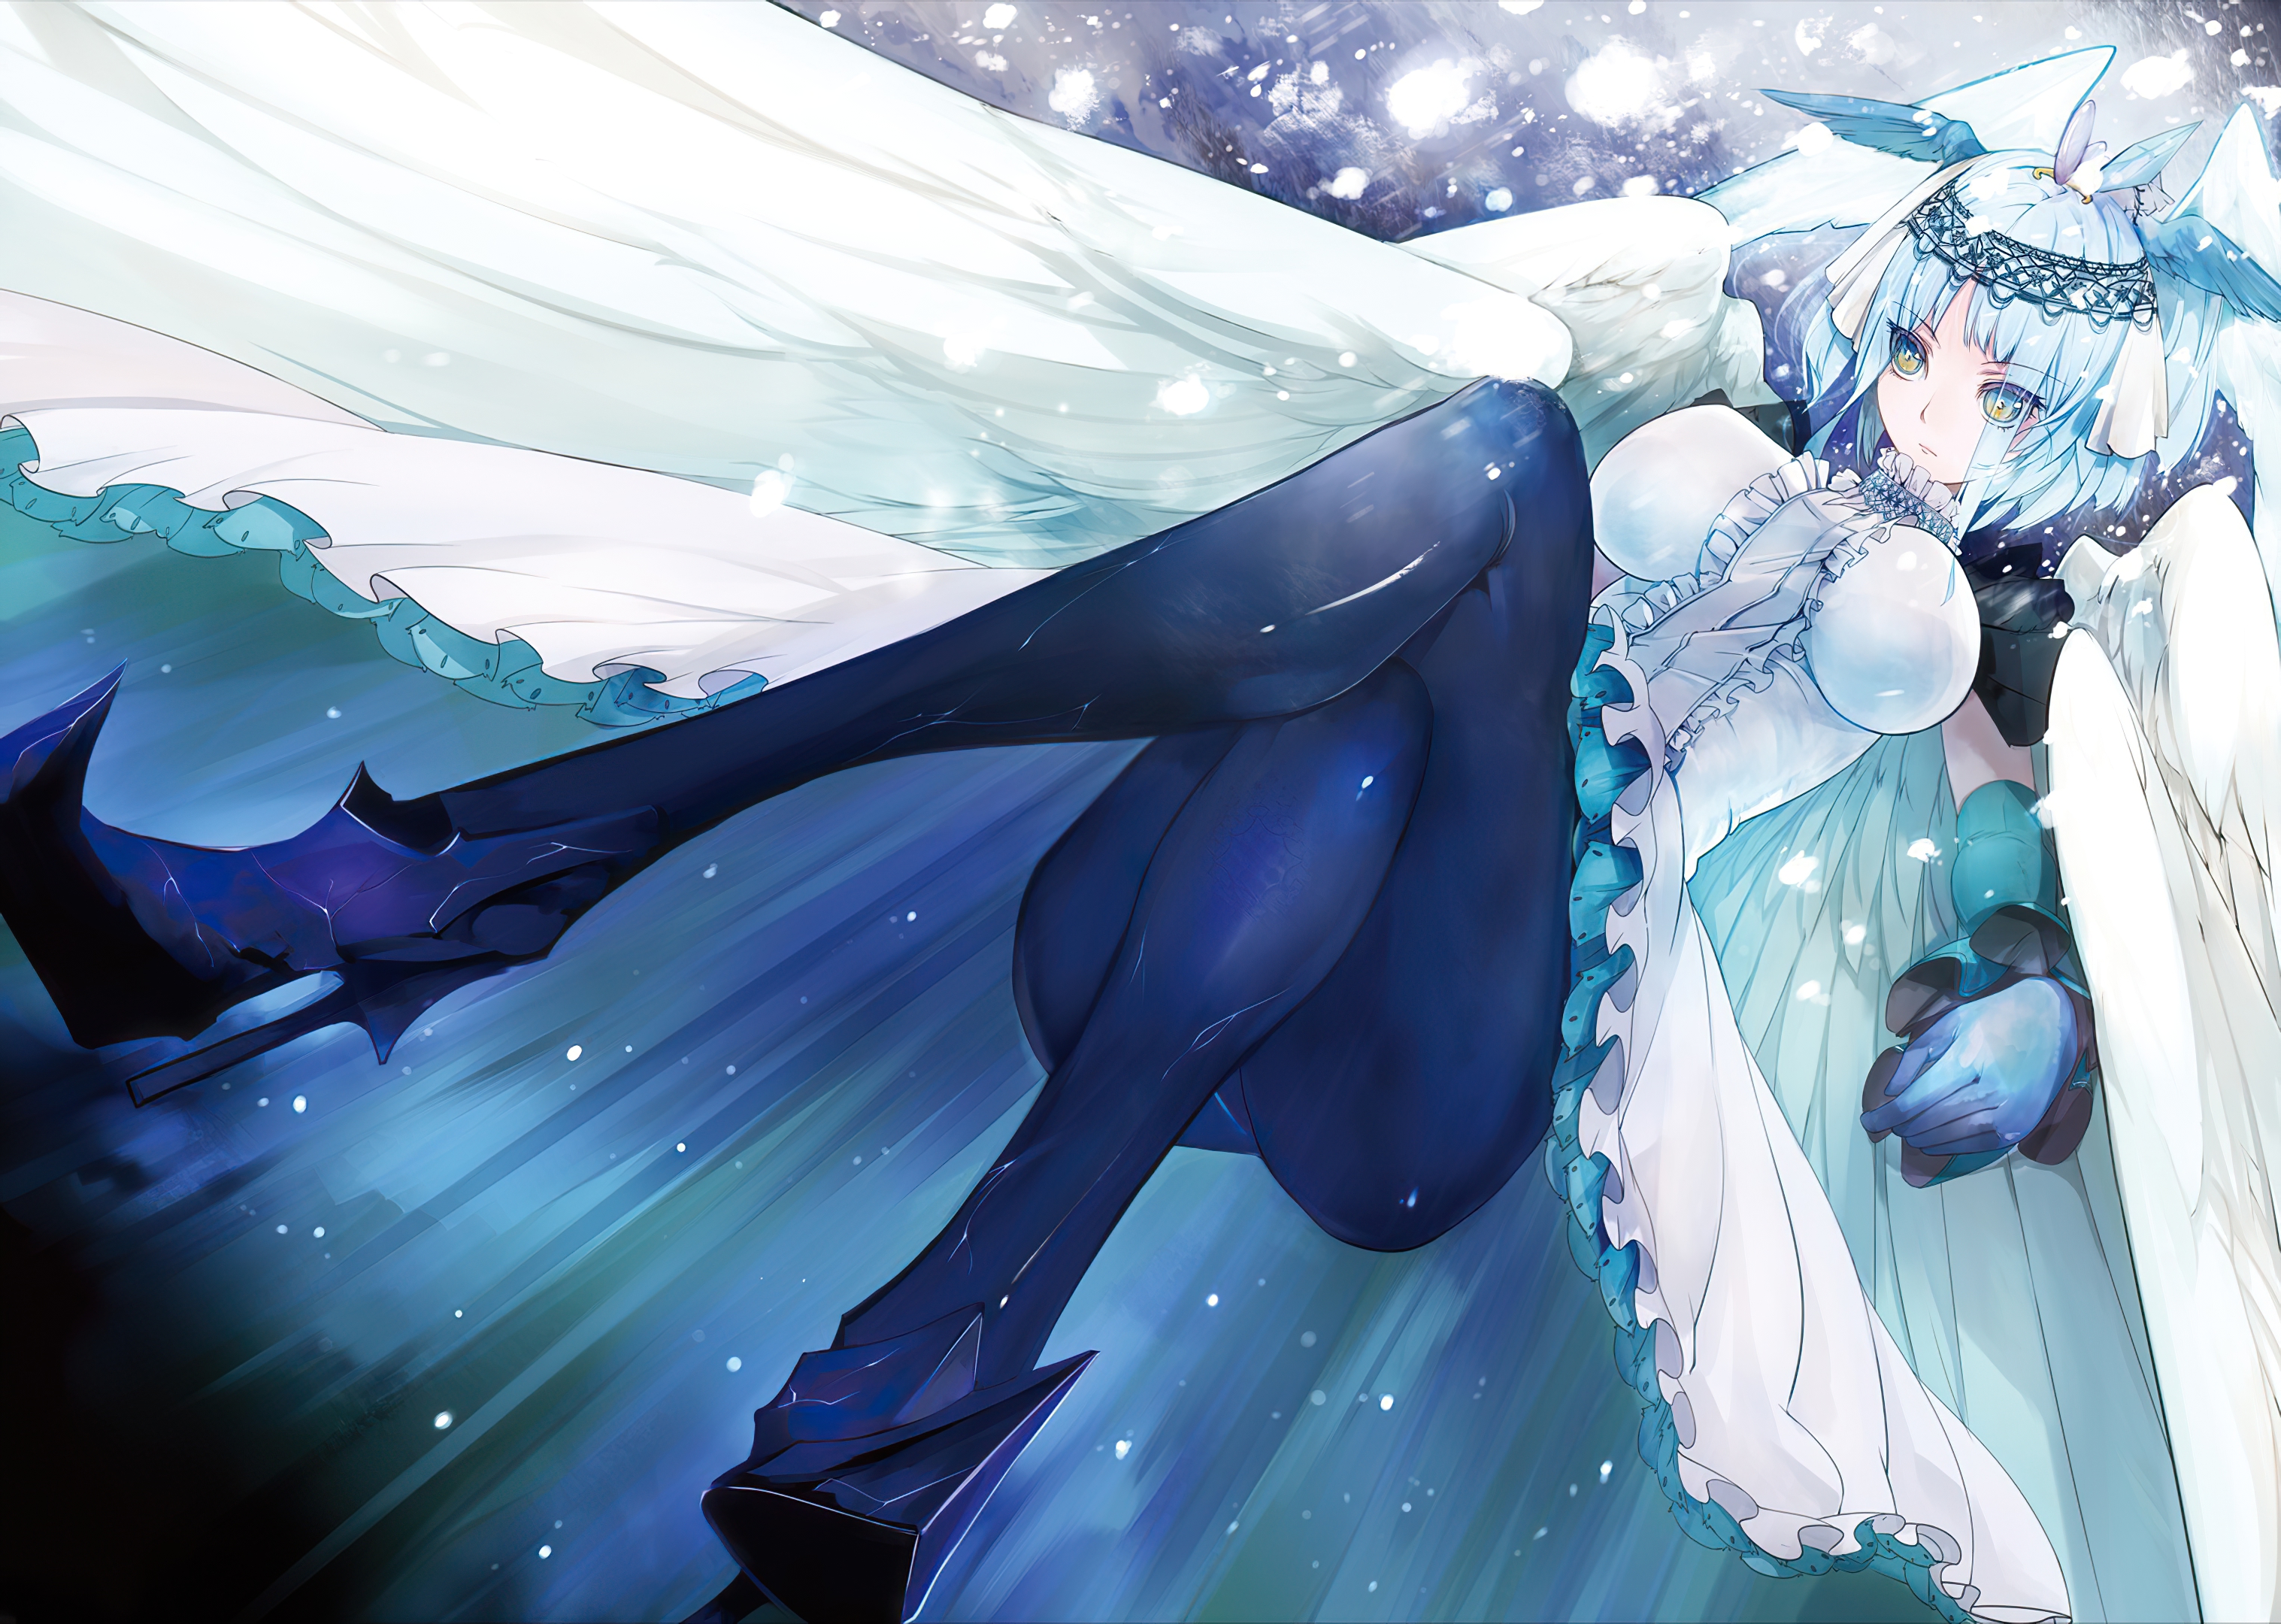 Beautiful angel from The Snow Queen fairytale, with stunning anime style.